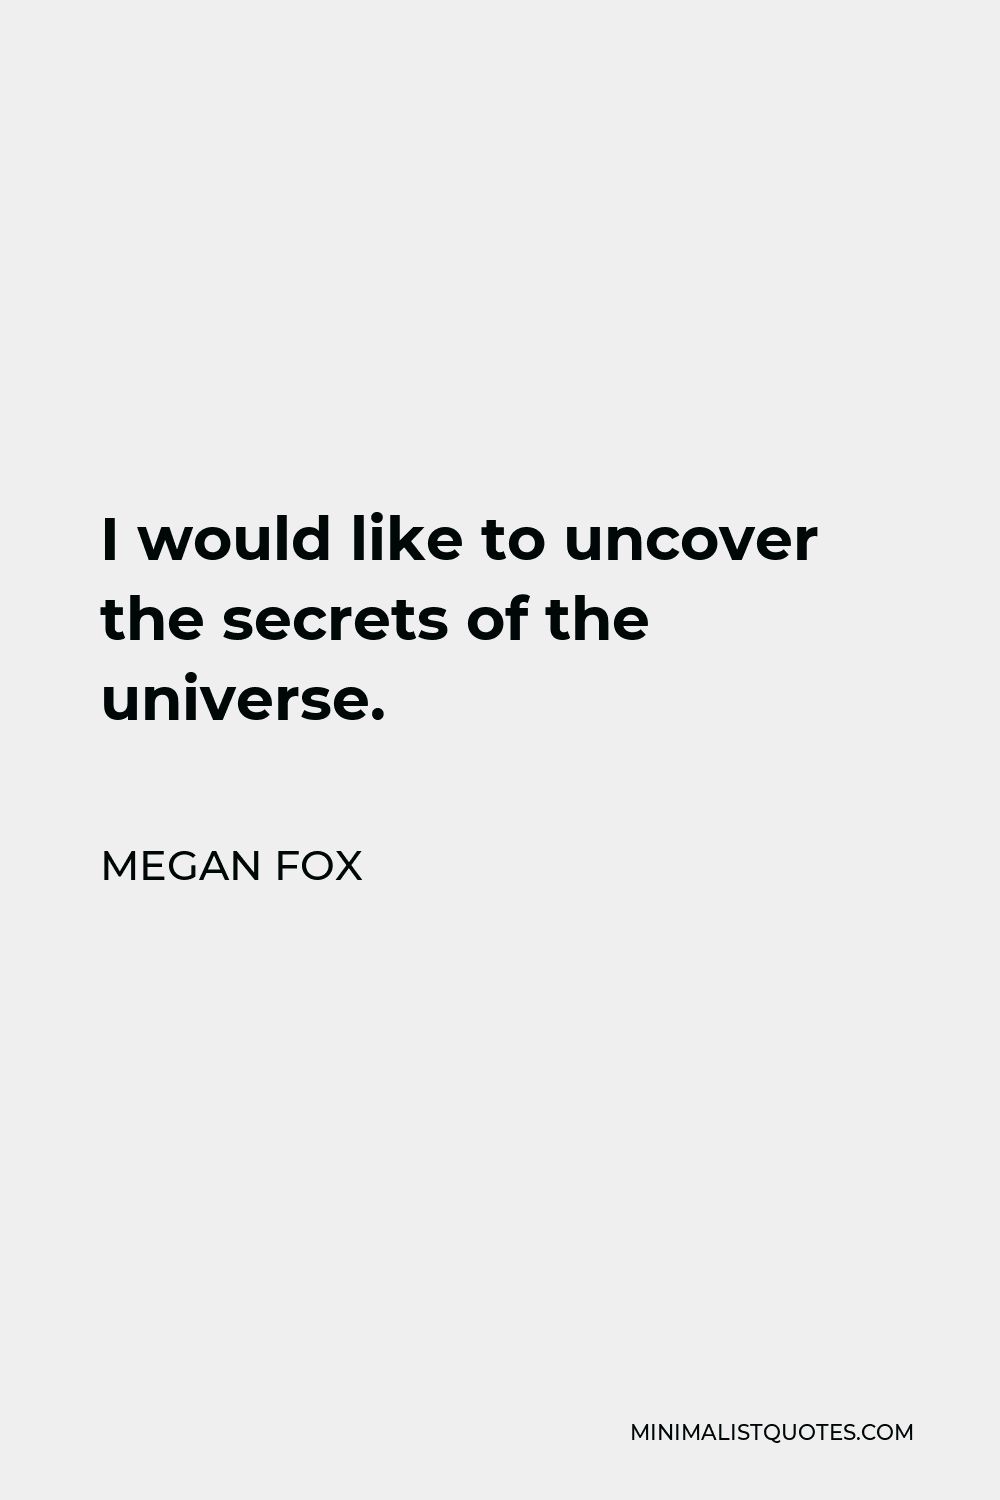 Megan Fox Quote - I would like to uncover the secrets of the universe.